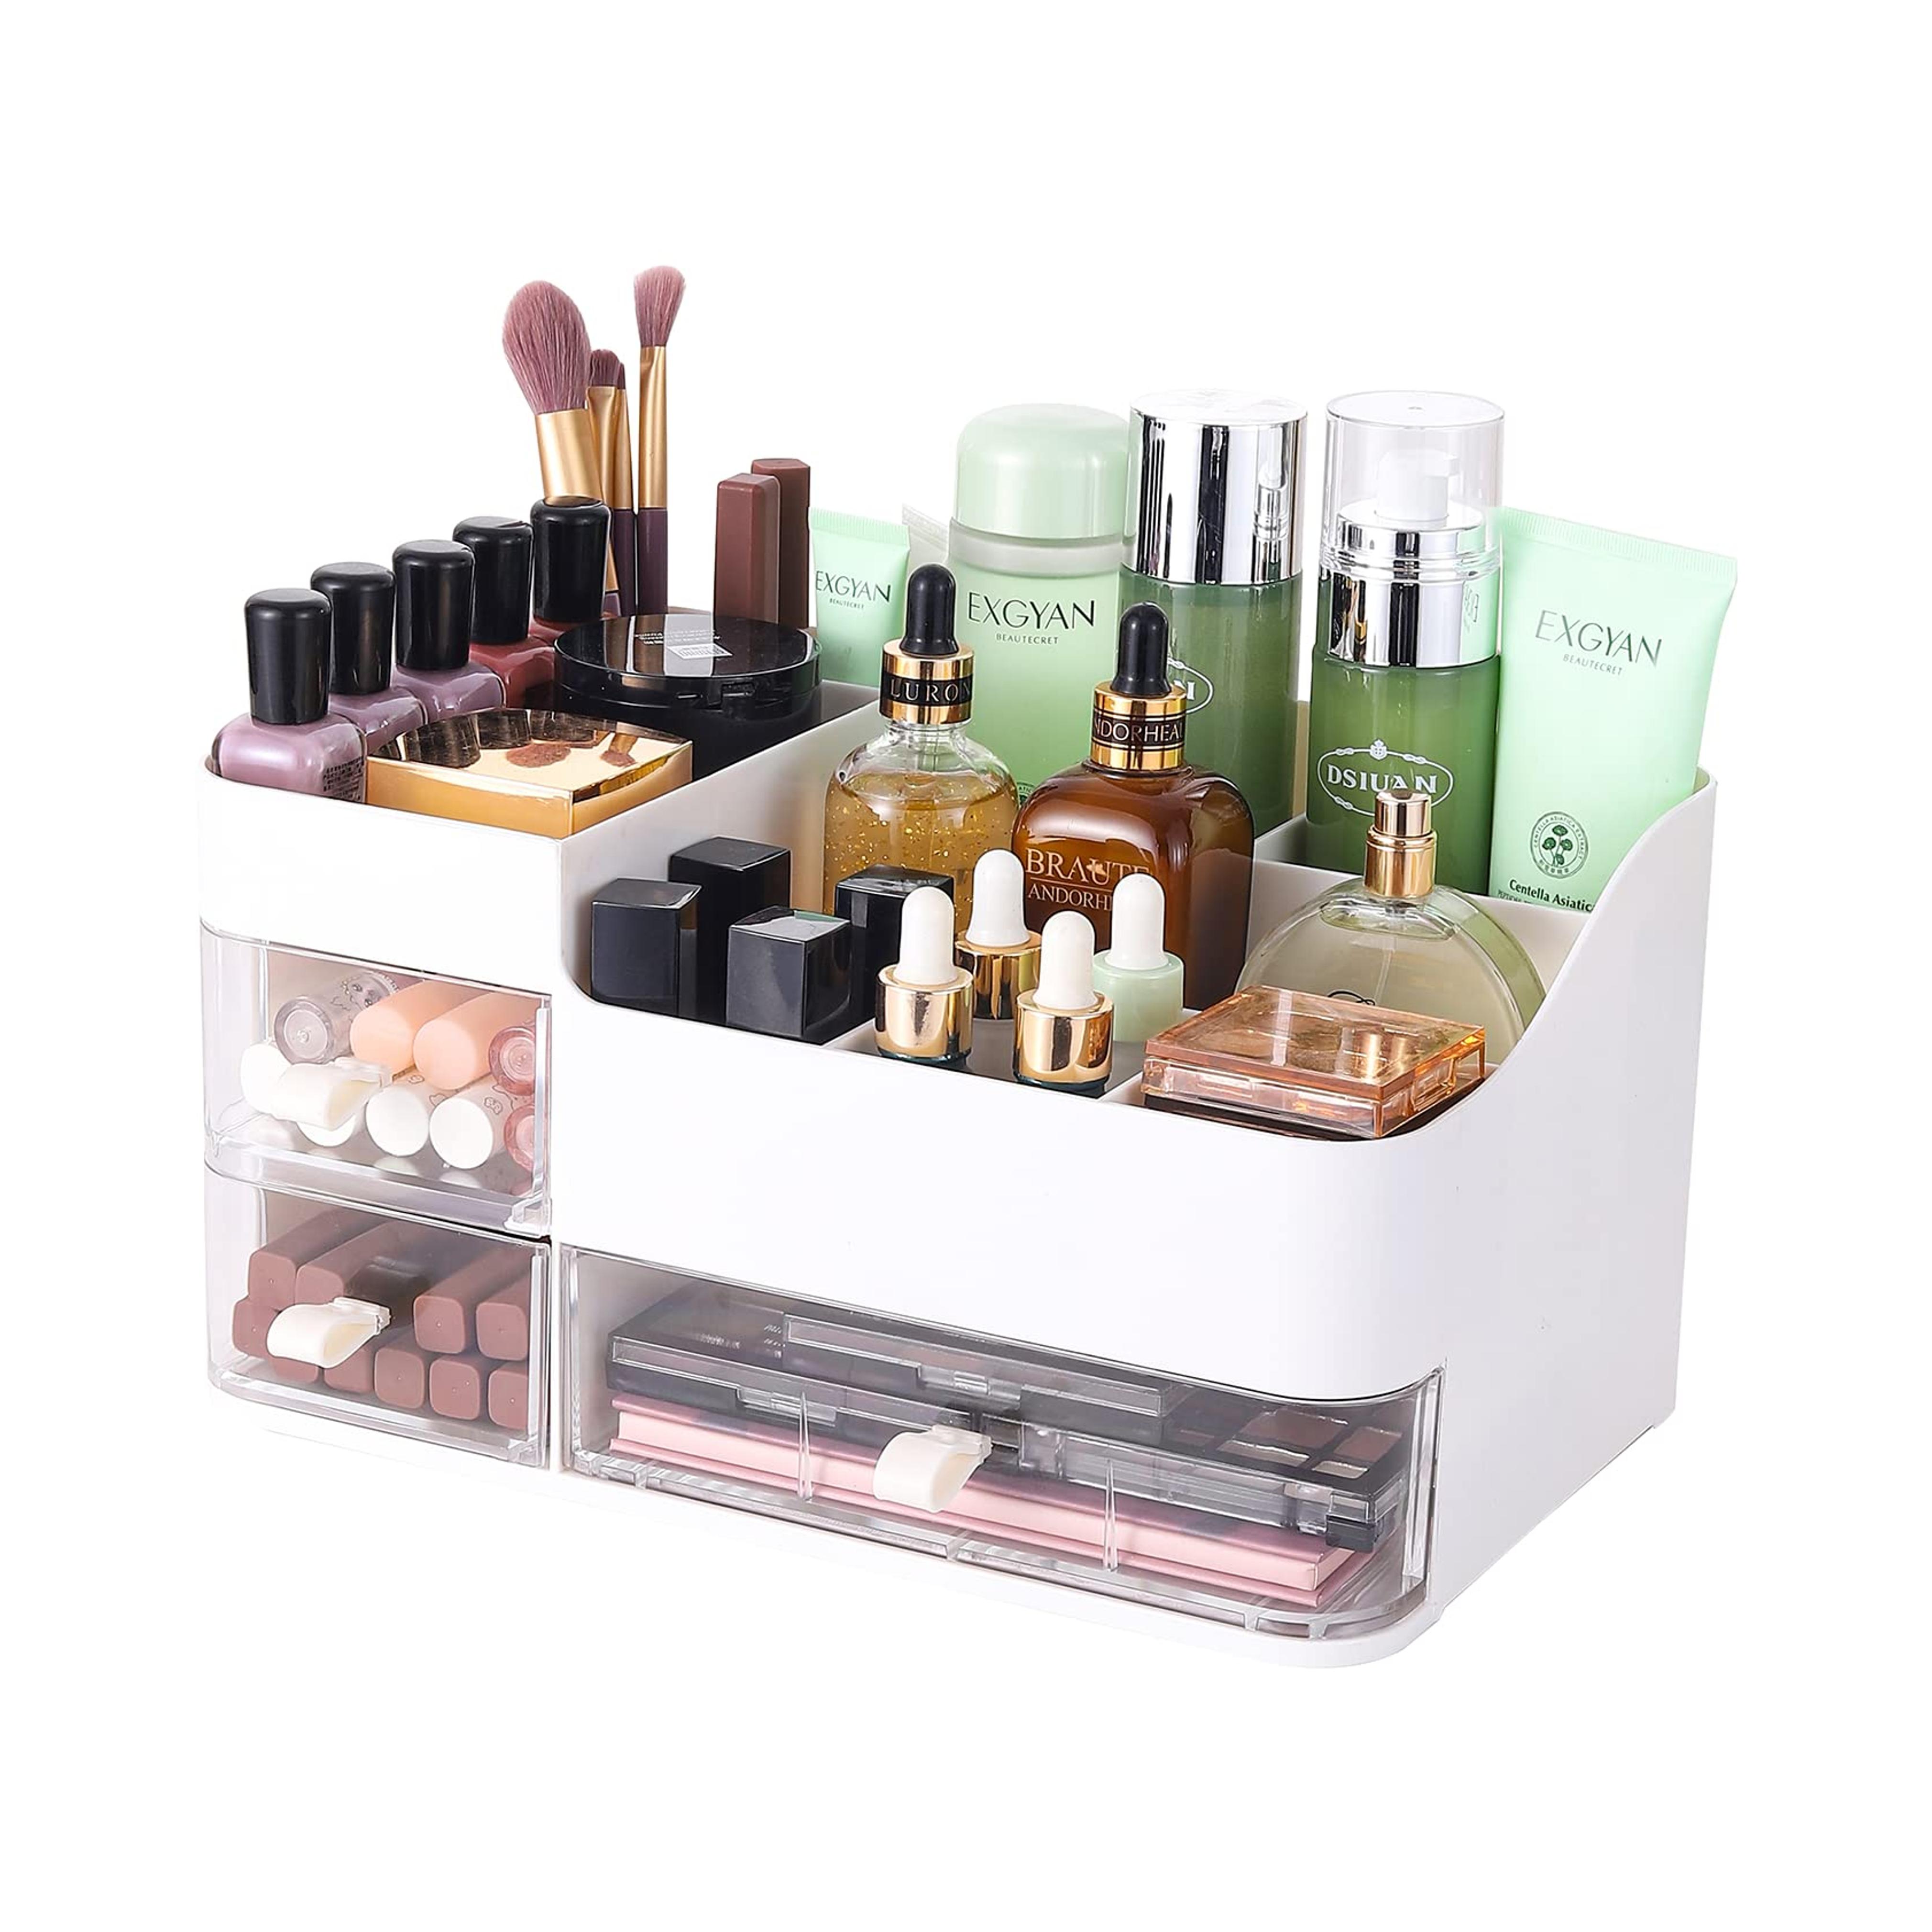 Cq acrylic Makeup Organizer And Storage White Skin Care Cosmetic Display Case With 3 Clear Drawers Make up Stands For Jewelry Hair Accessories Lipstick Lotions Beauty Skincare Product Organizing